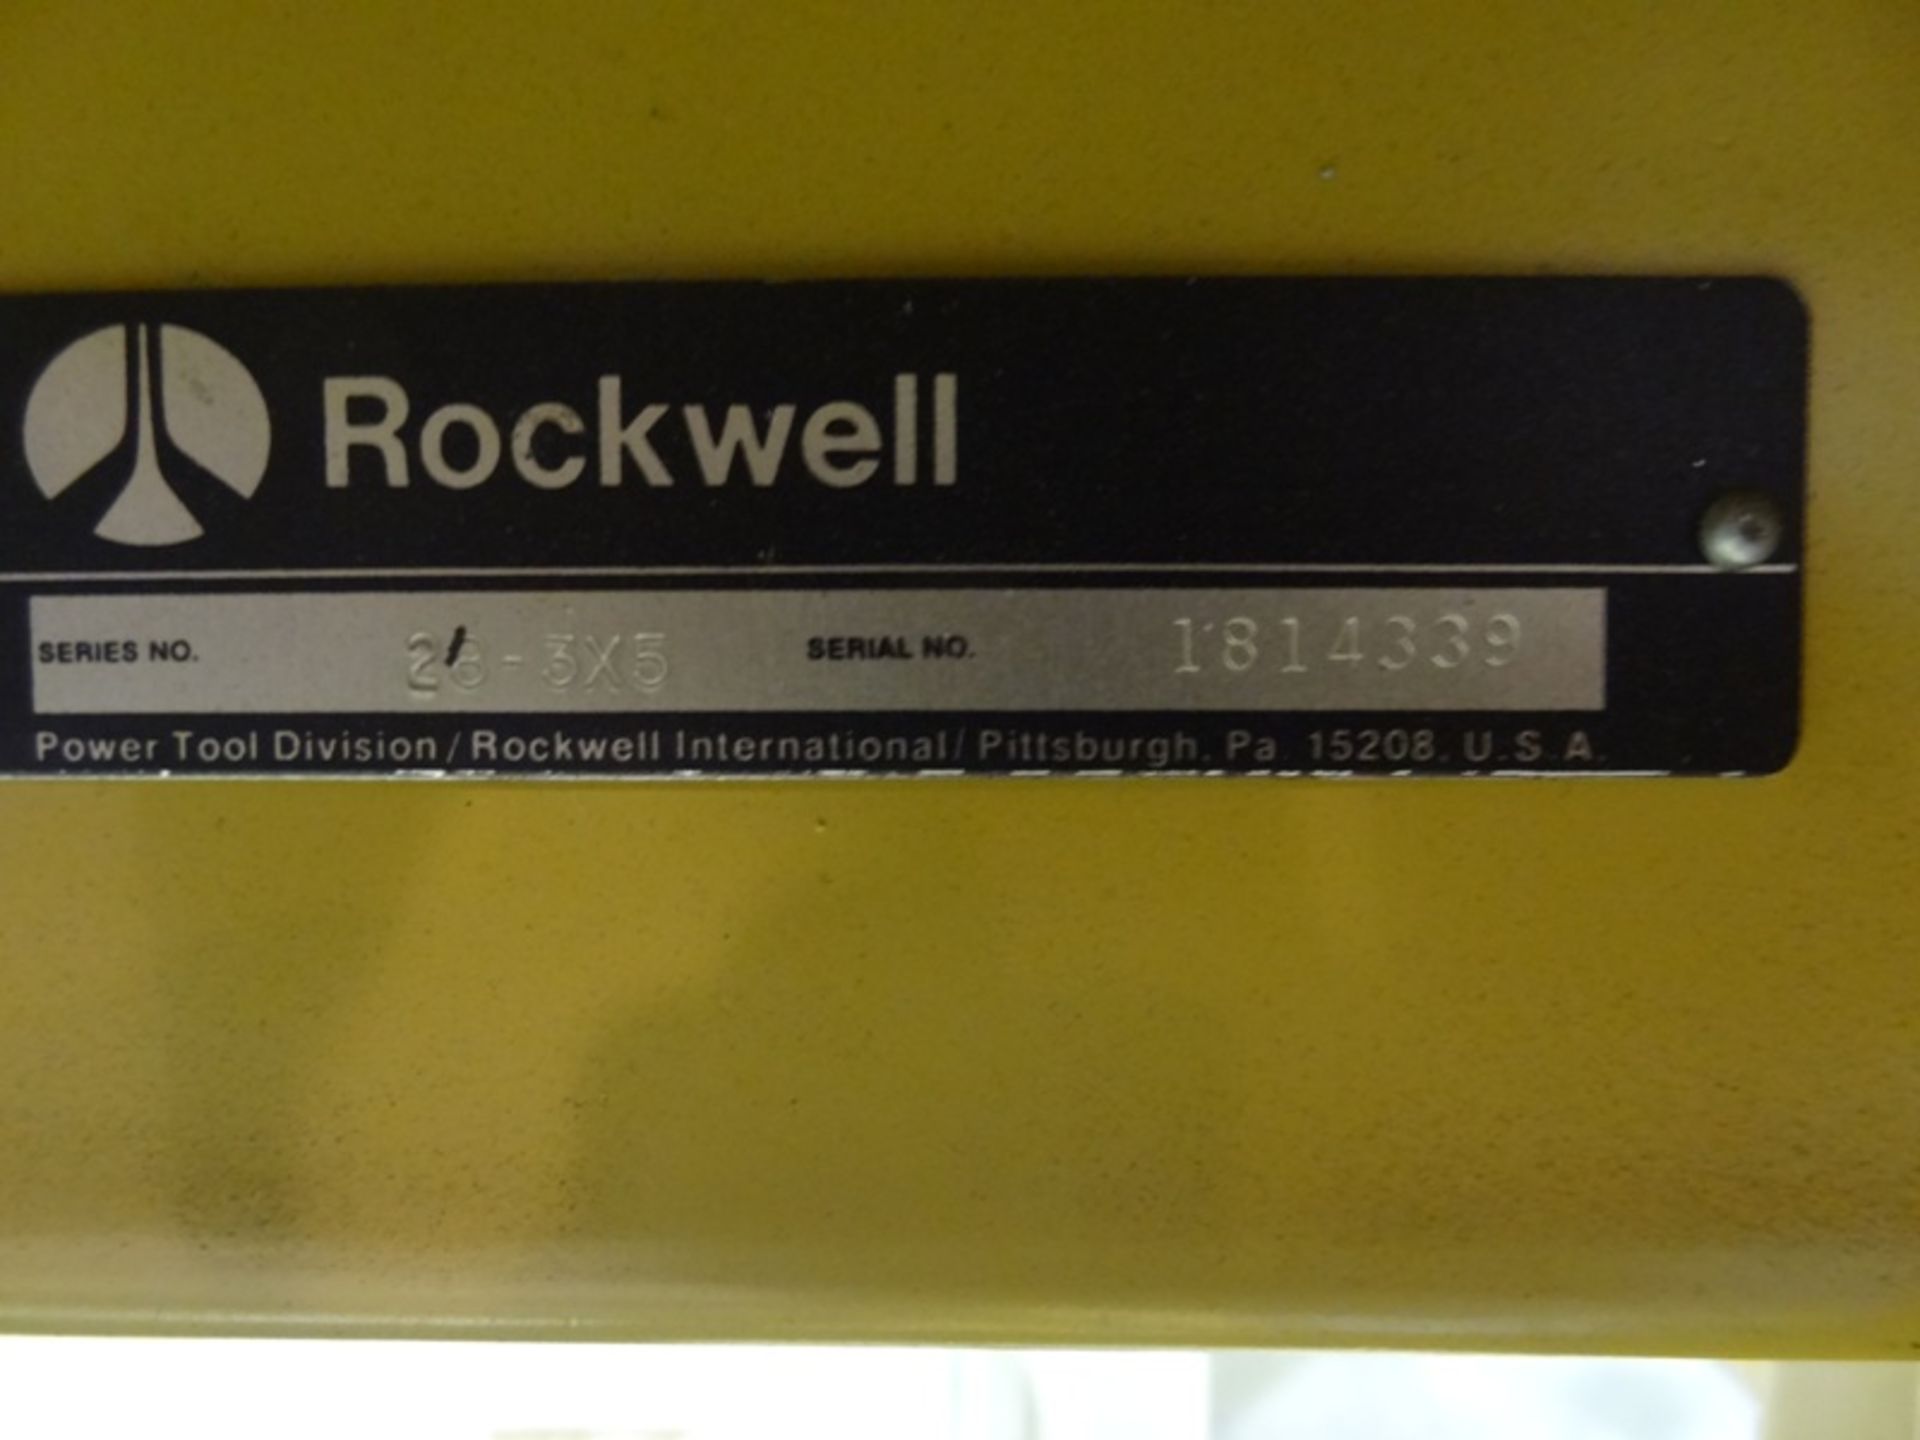 ROCKWELL 20" VERTICAL BANDSAW, SERIES 28-3X5, SN 1814339,  LOCATION MI, BUYER TO SHIP